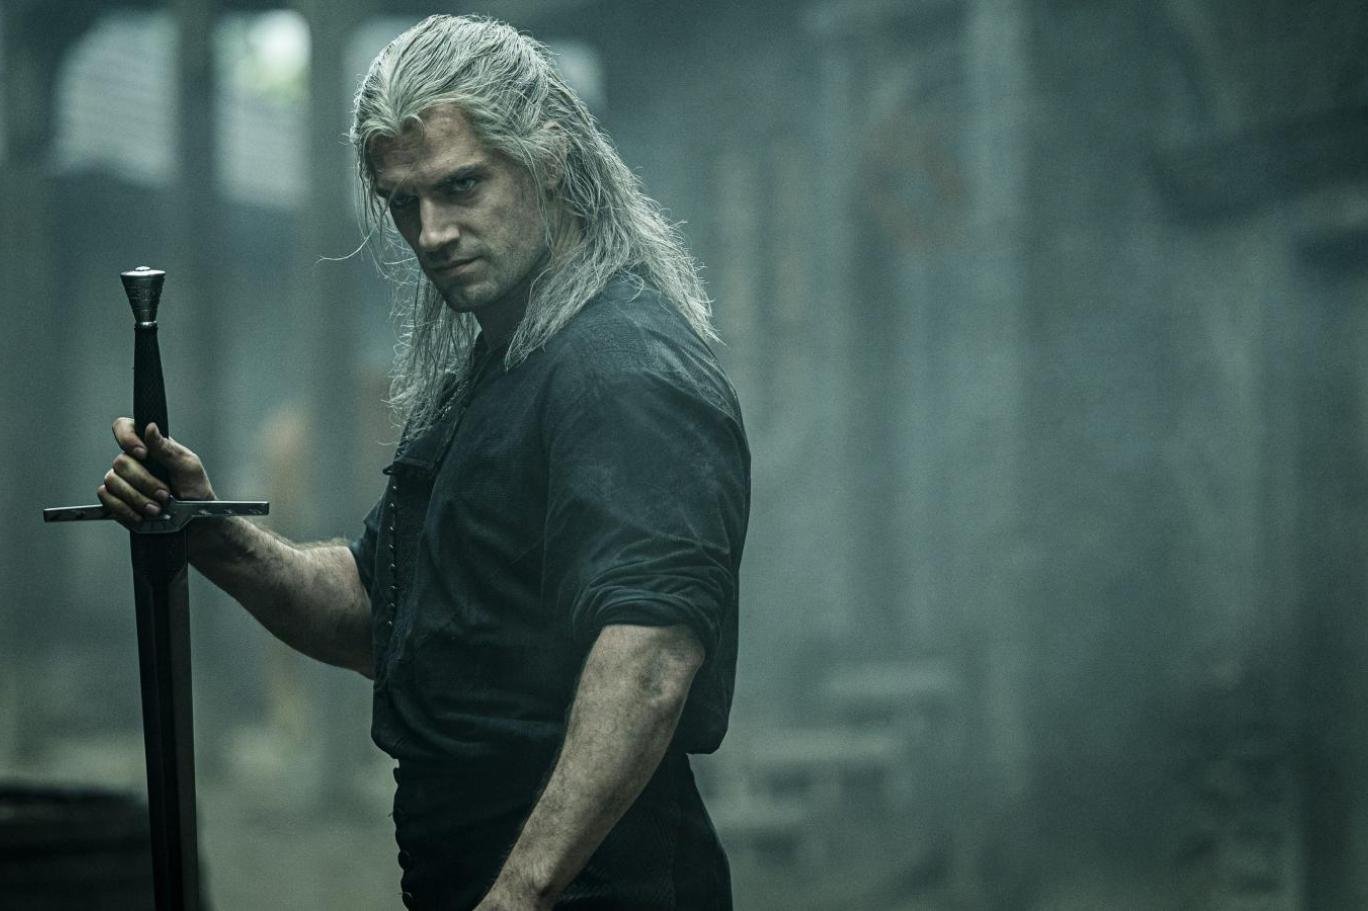 The Witcher season 2 will not be on Netflix in June 2021